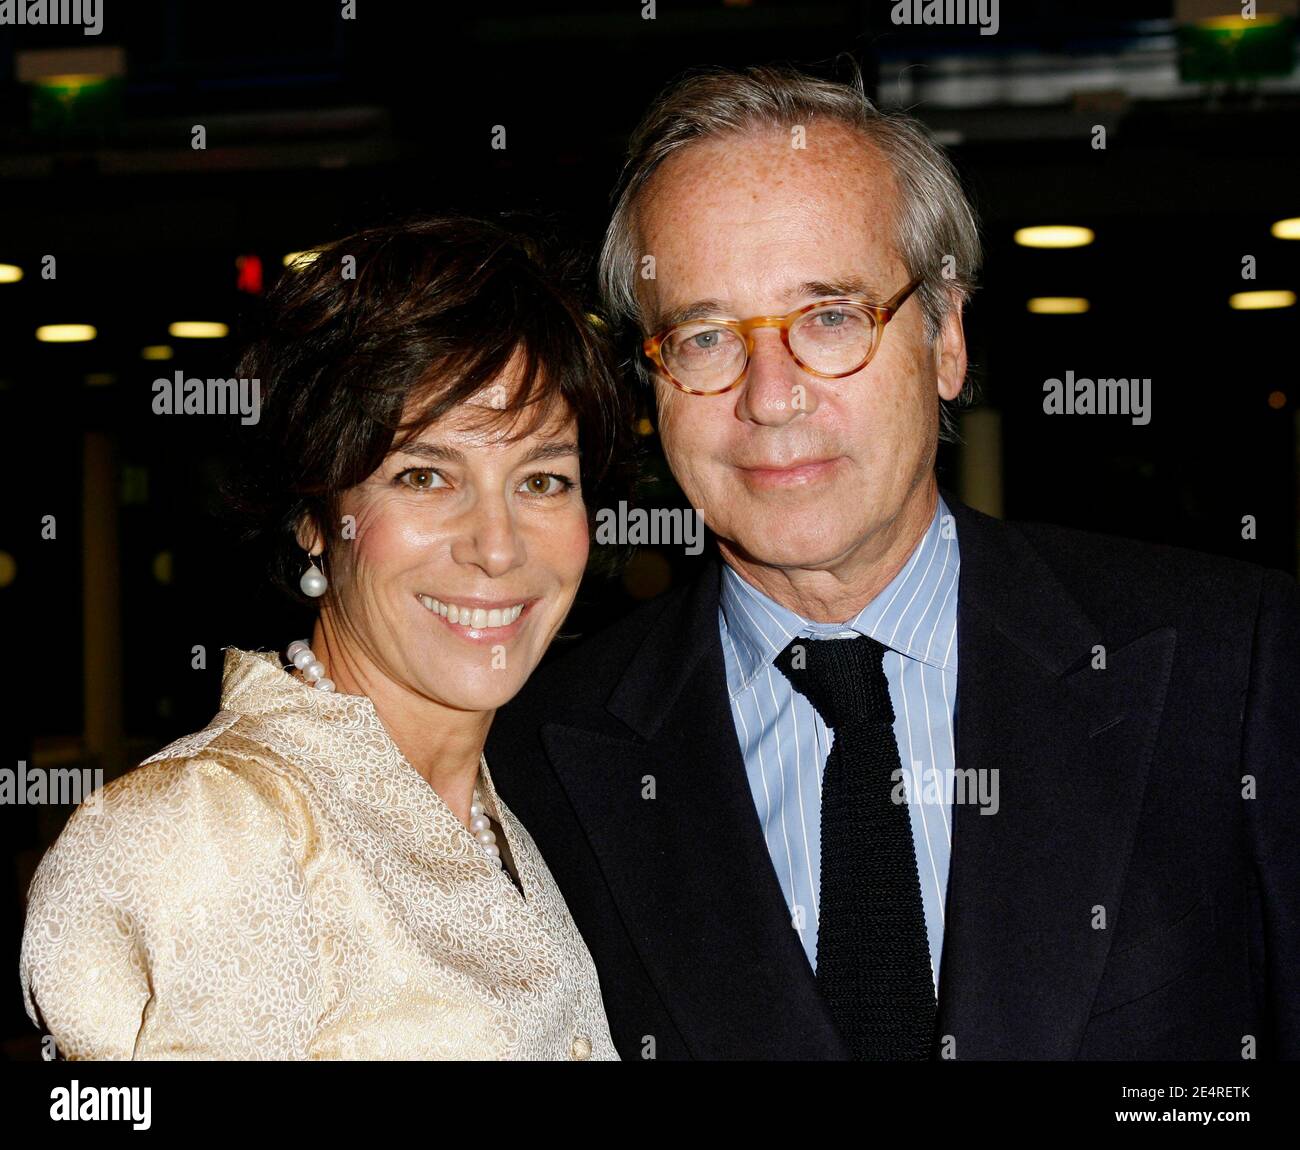 Christine Orban and Olivier attend the Friends of Beaubourg Party to celebrate the 31th anniversary of the Beaubourg Museum, on March 11, 2008 in Paris, France. Photo by Marco Vitchi/ABACAPRESS.COM Stock Photo